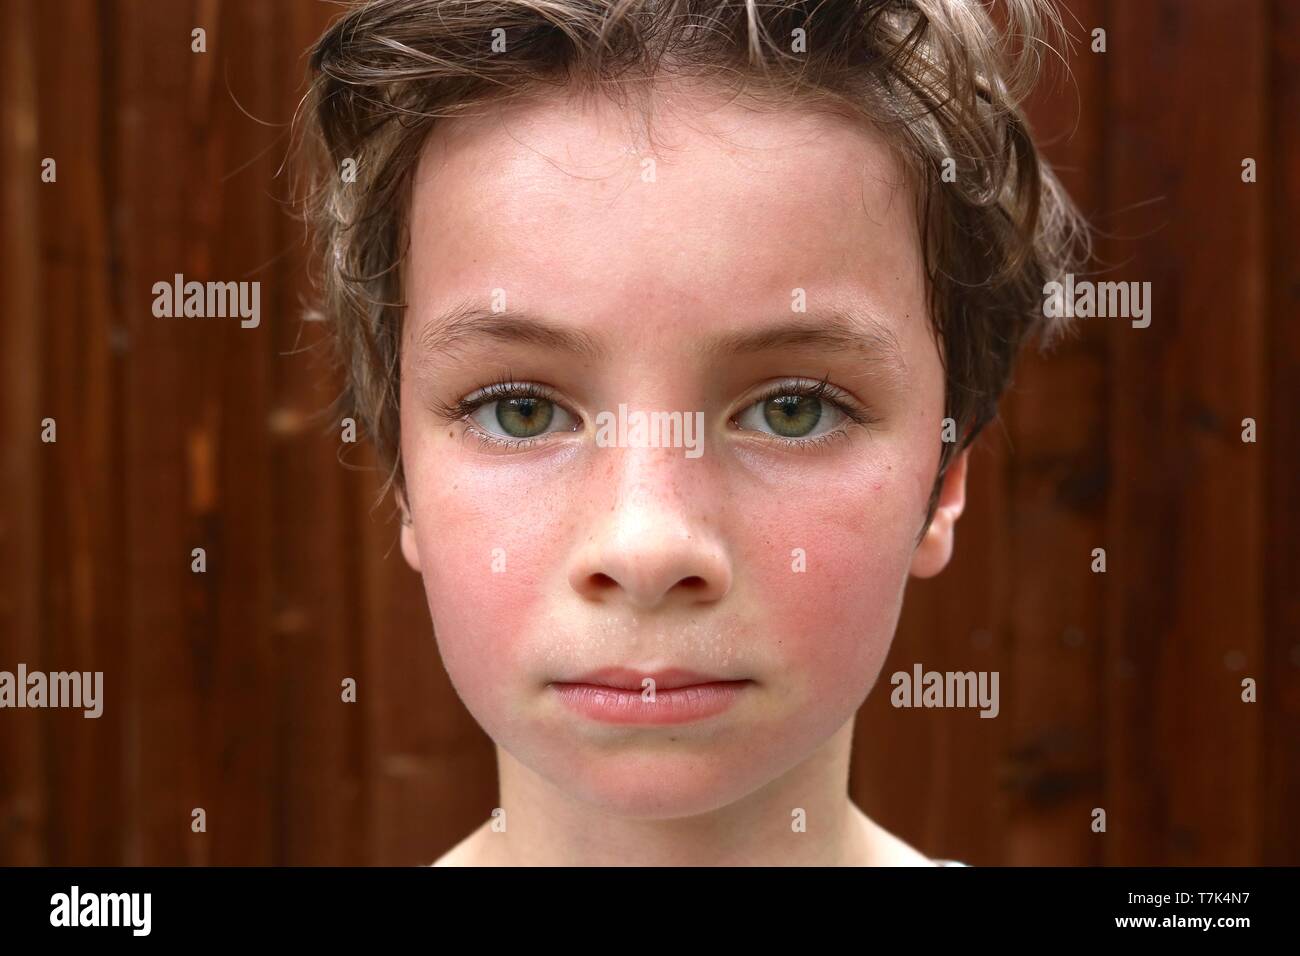 Portrait of a hot and sweaty child with big green eyes and short brown hair Stock Photo